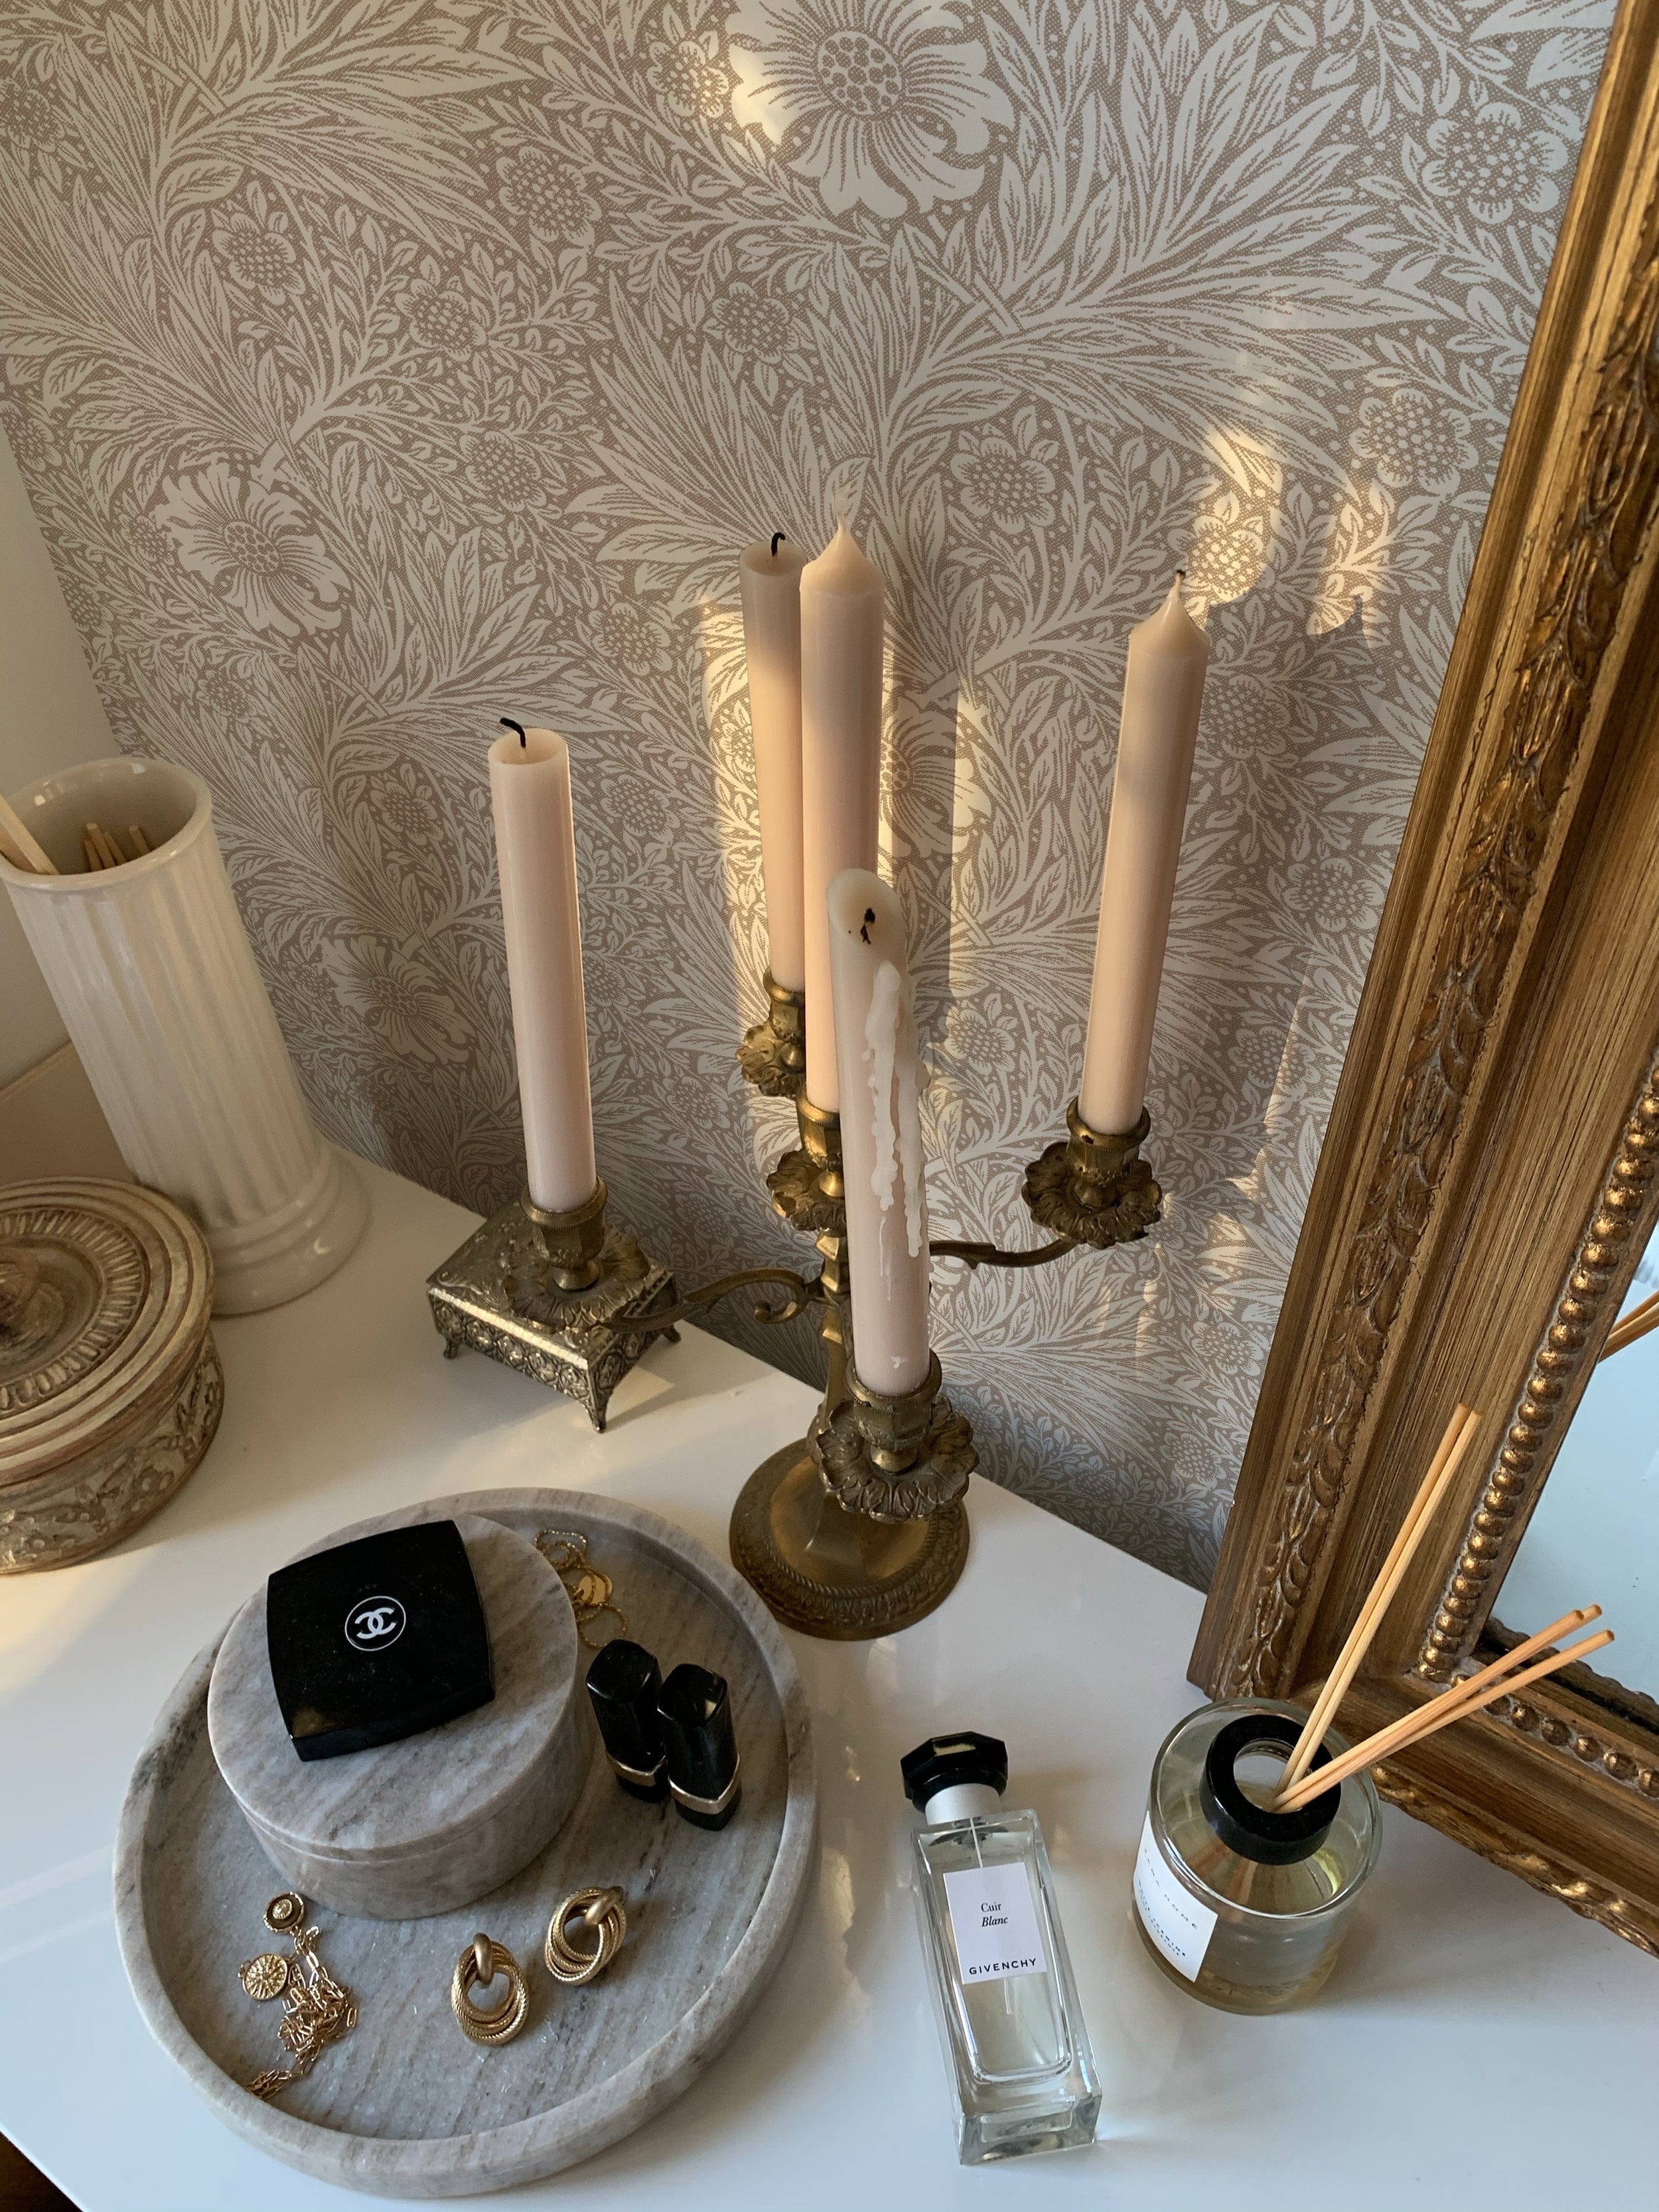 Elegant interior setup with a Timeless Floral Wallpaper featuring intricate beige floral patterns, enhancing the antique look of a gilded mirror and vintage decorations